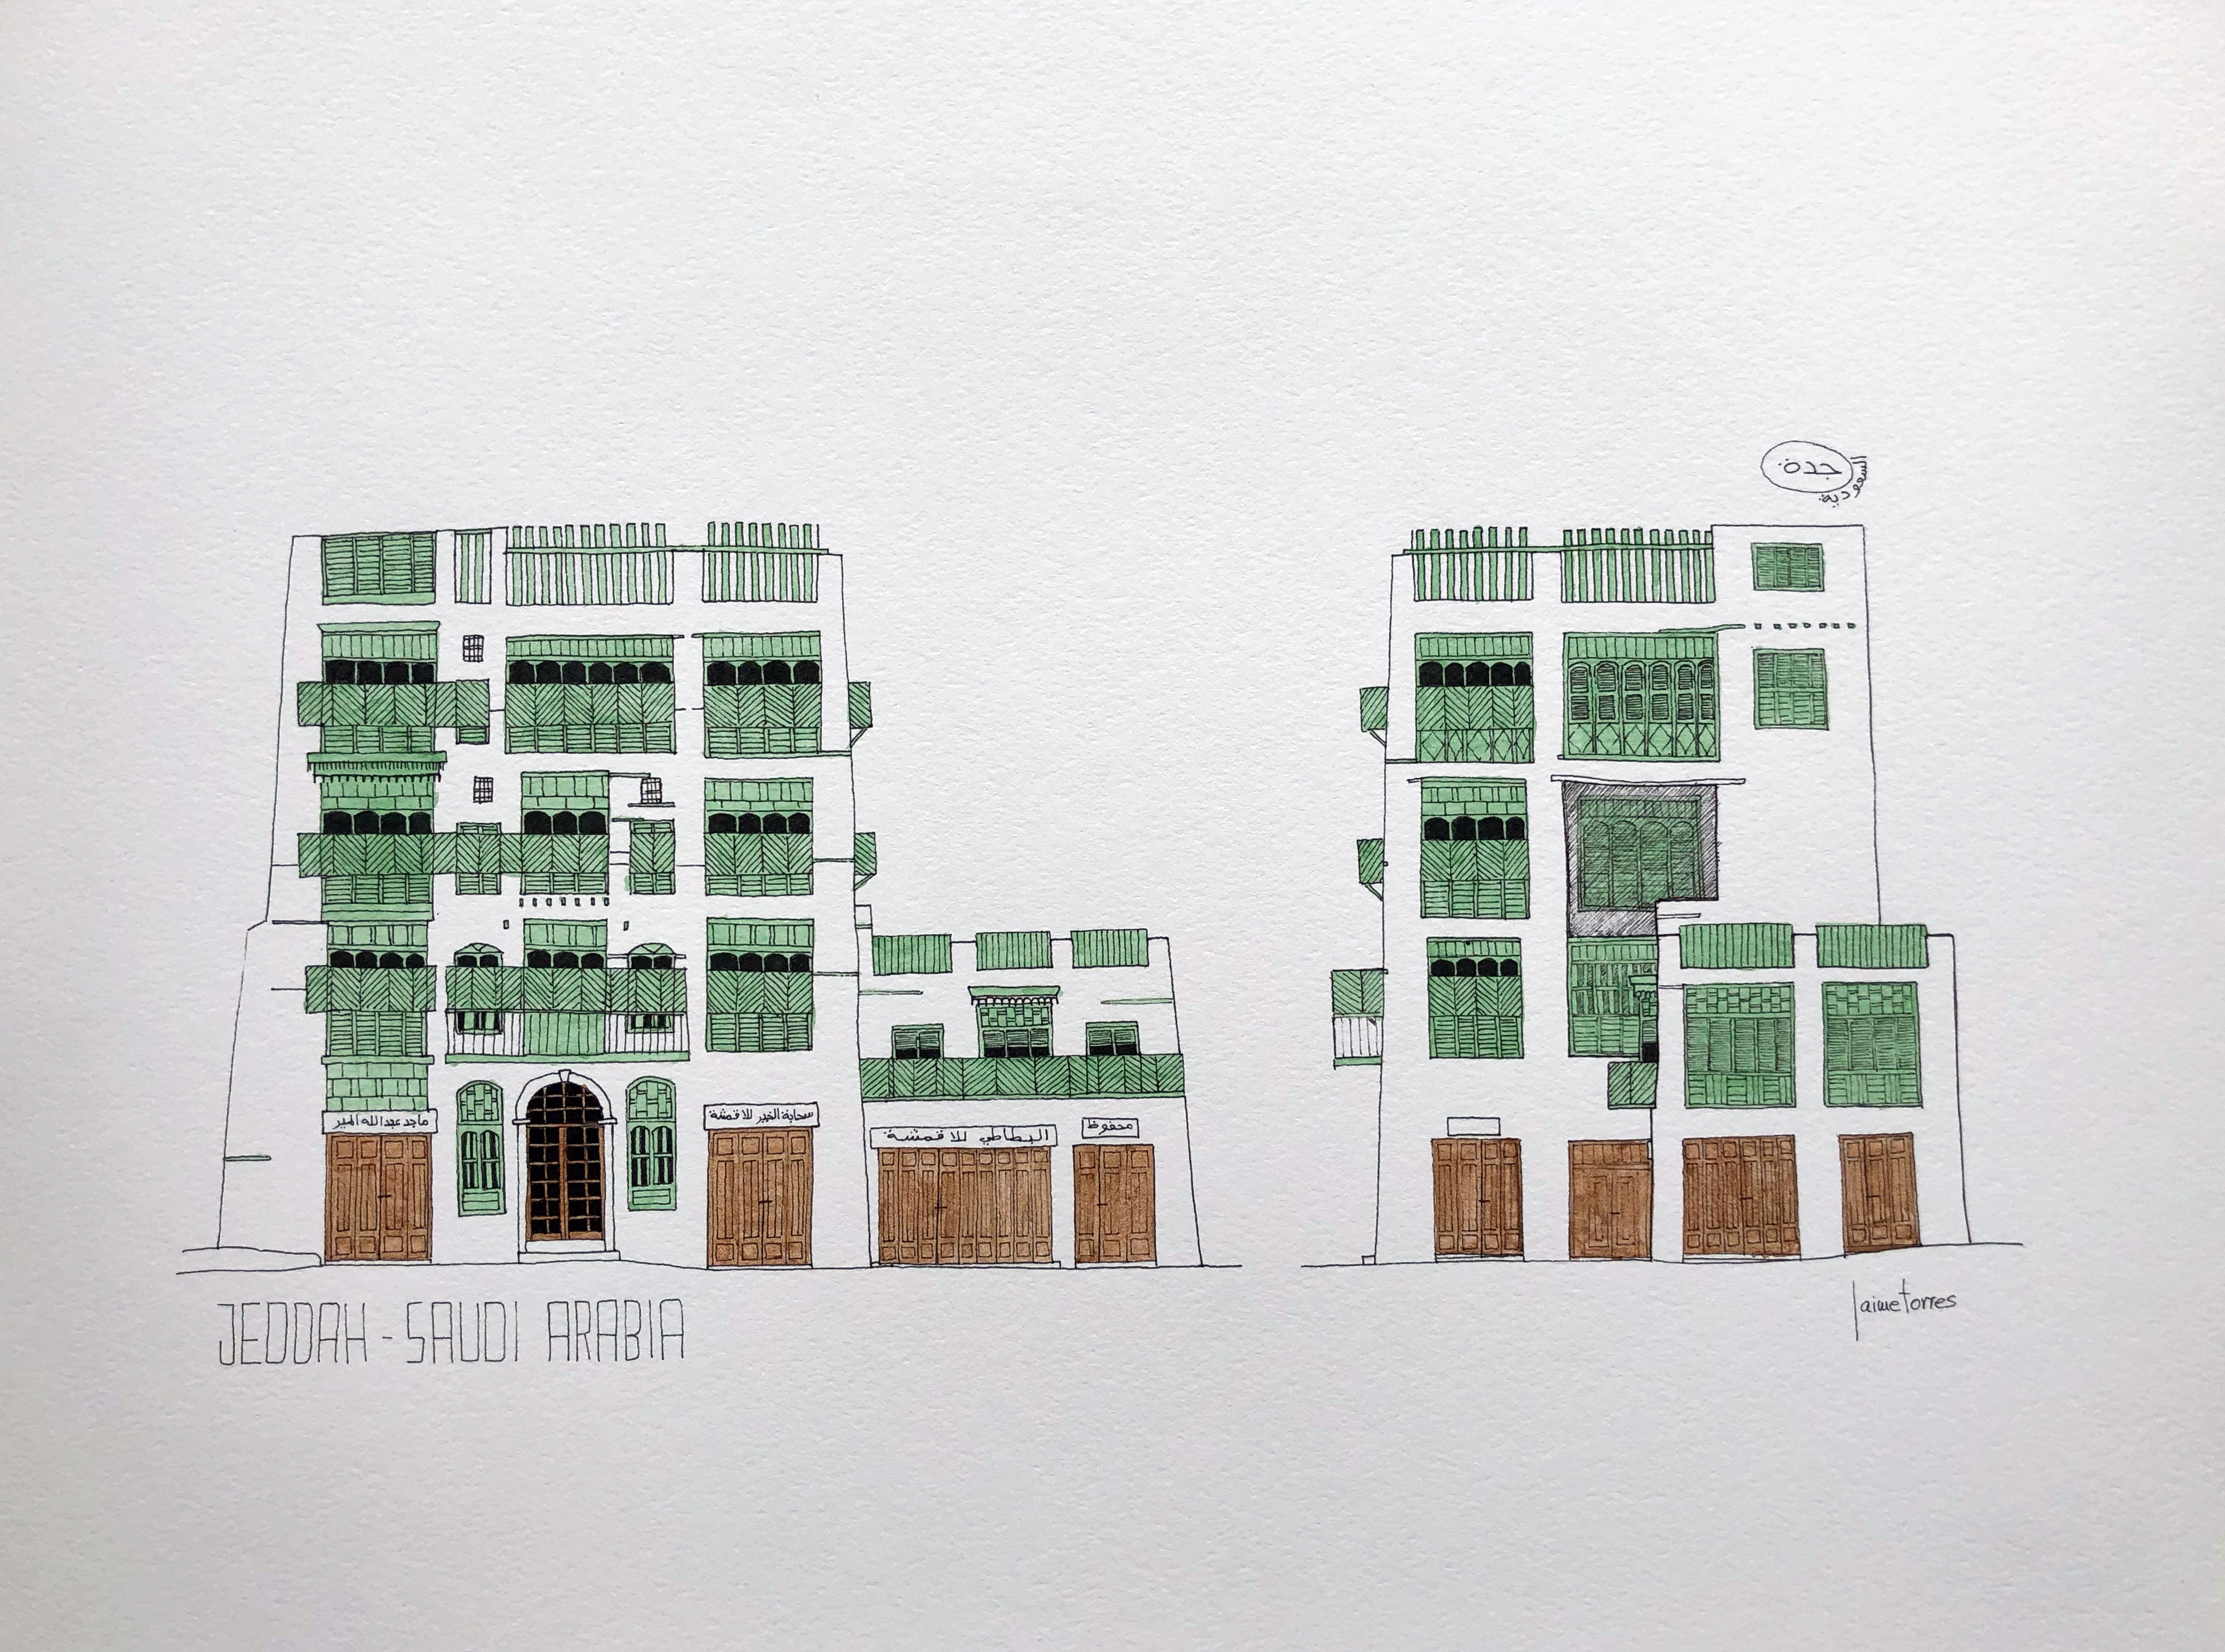 Sketch of Facade of Jeddah AlBalad painted in green watercolor